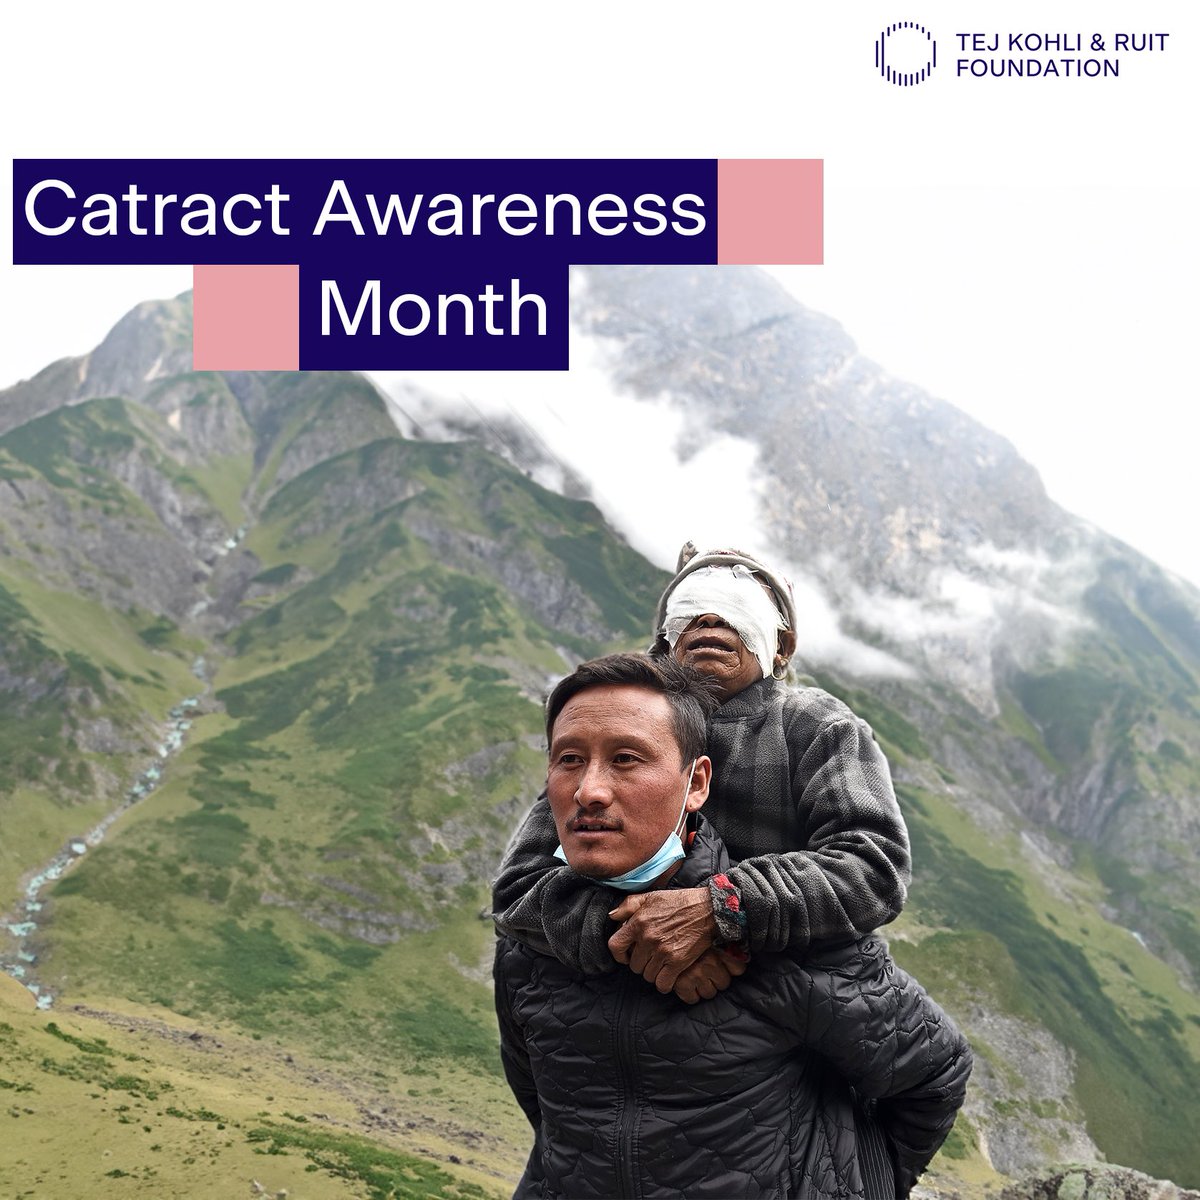 Shining a light on clear vision and brighter tomorrows! Join us in raising awareness for Cataract Awareness Month and empowering individuals to take charge of their eye health.  #CataractAwarenessMonth #ClearVisionAhead #EyeHealthMatters #2030insight